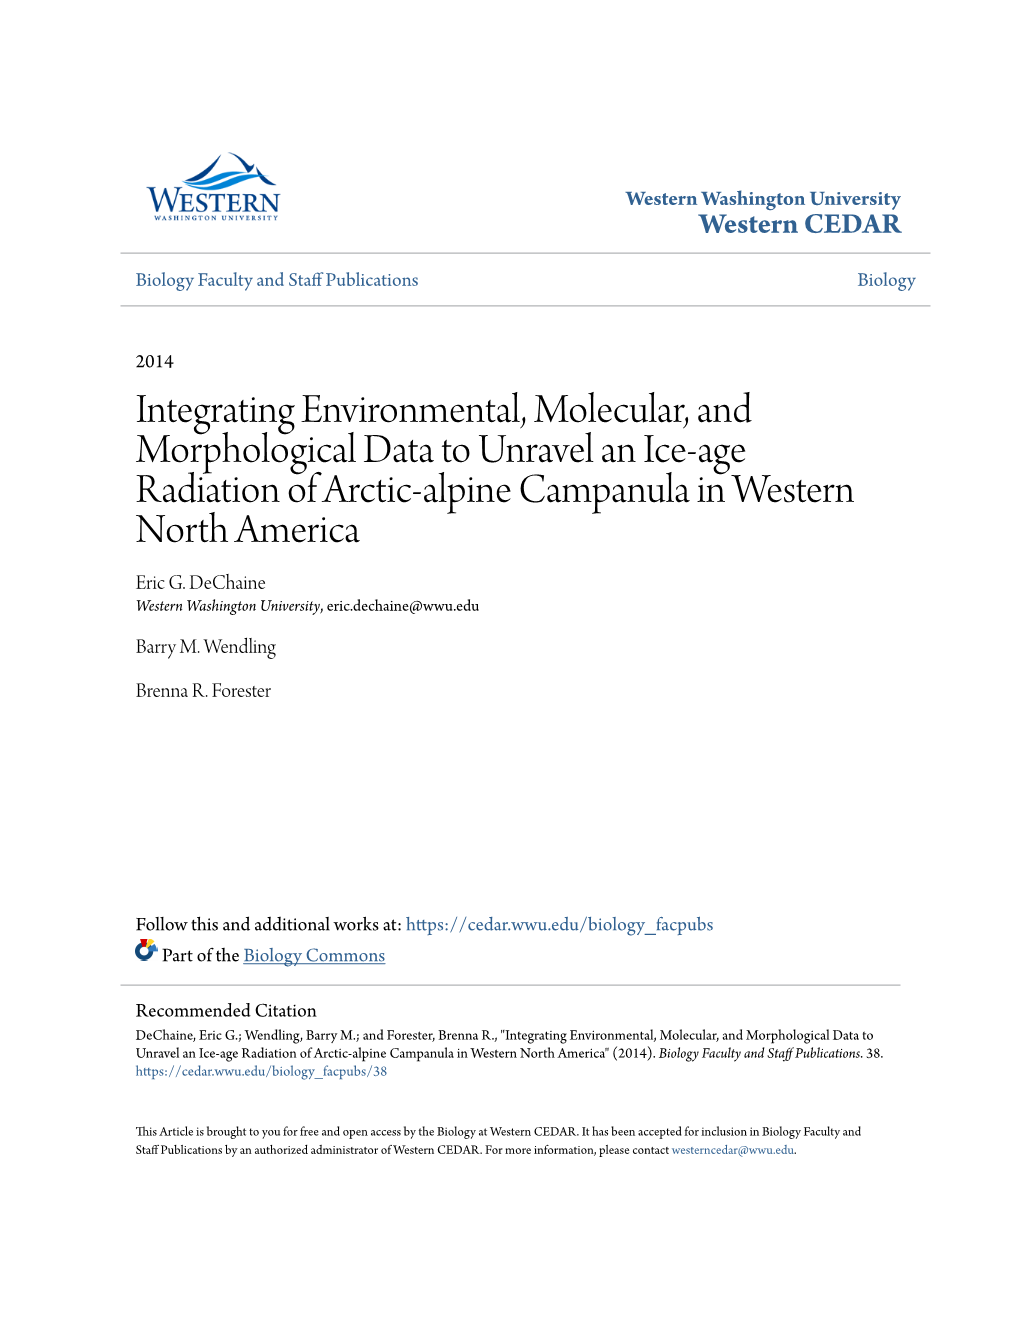 Integrating Environmental, Molecular, and Morphological Data to Unravel an Ice-Age Radiation of Arctic-Alpine Campanula in Western North America Eric G